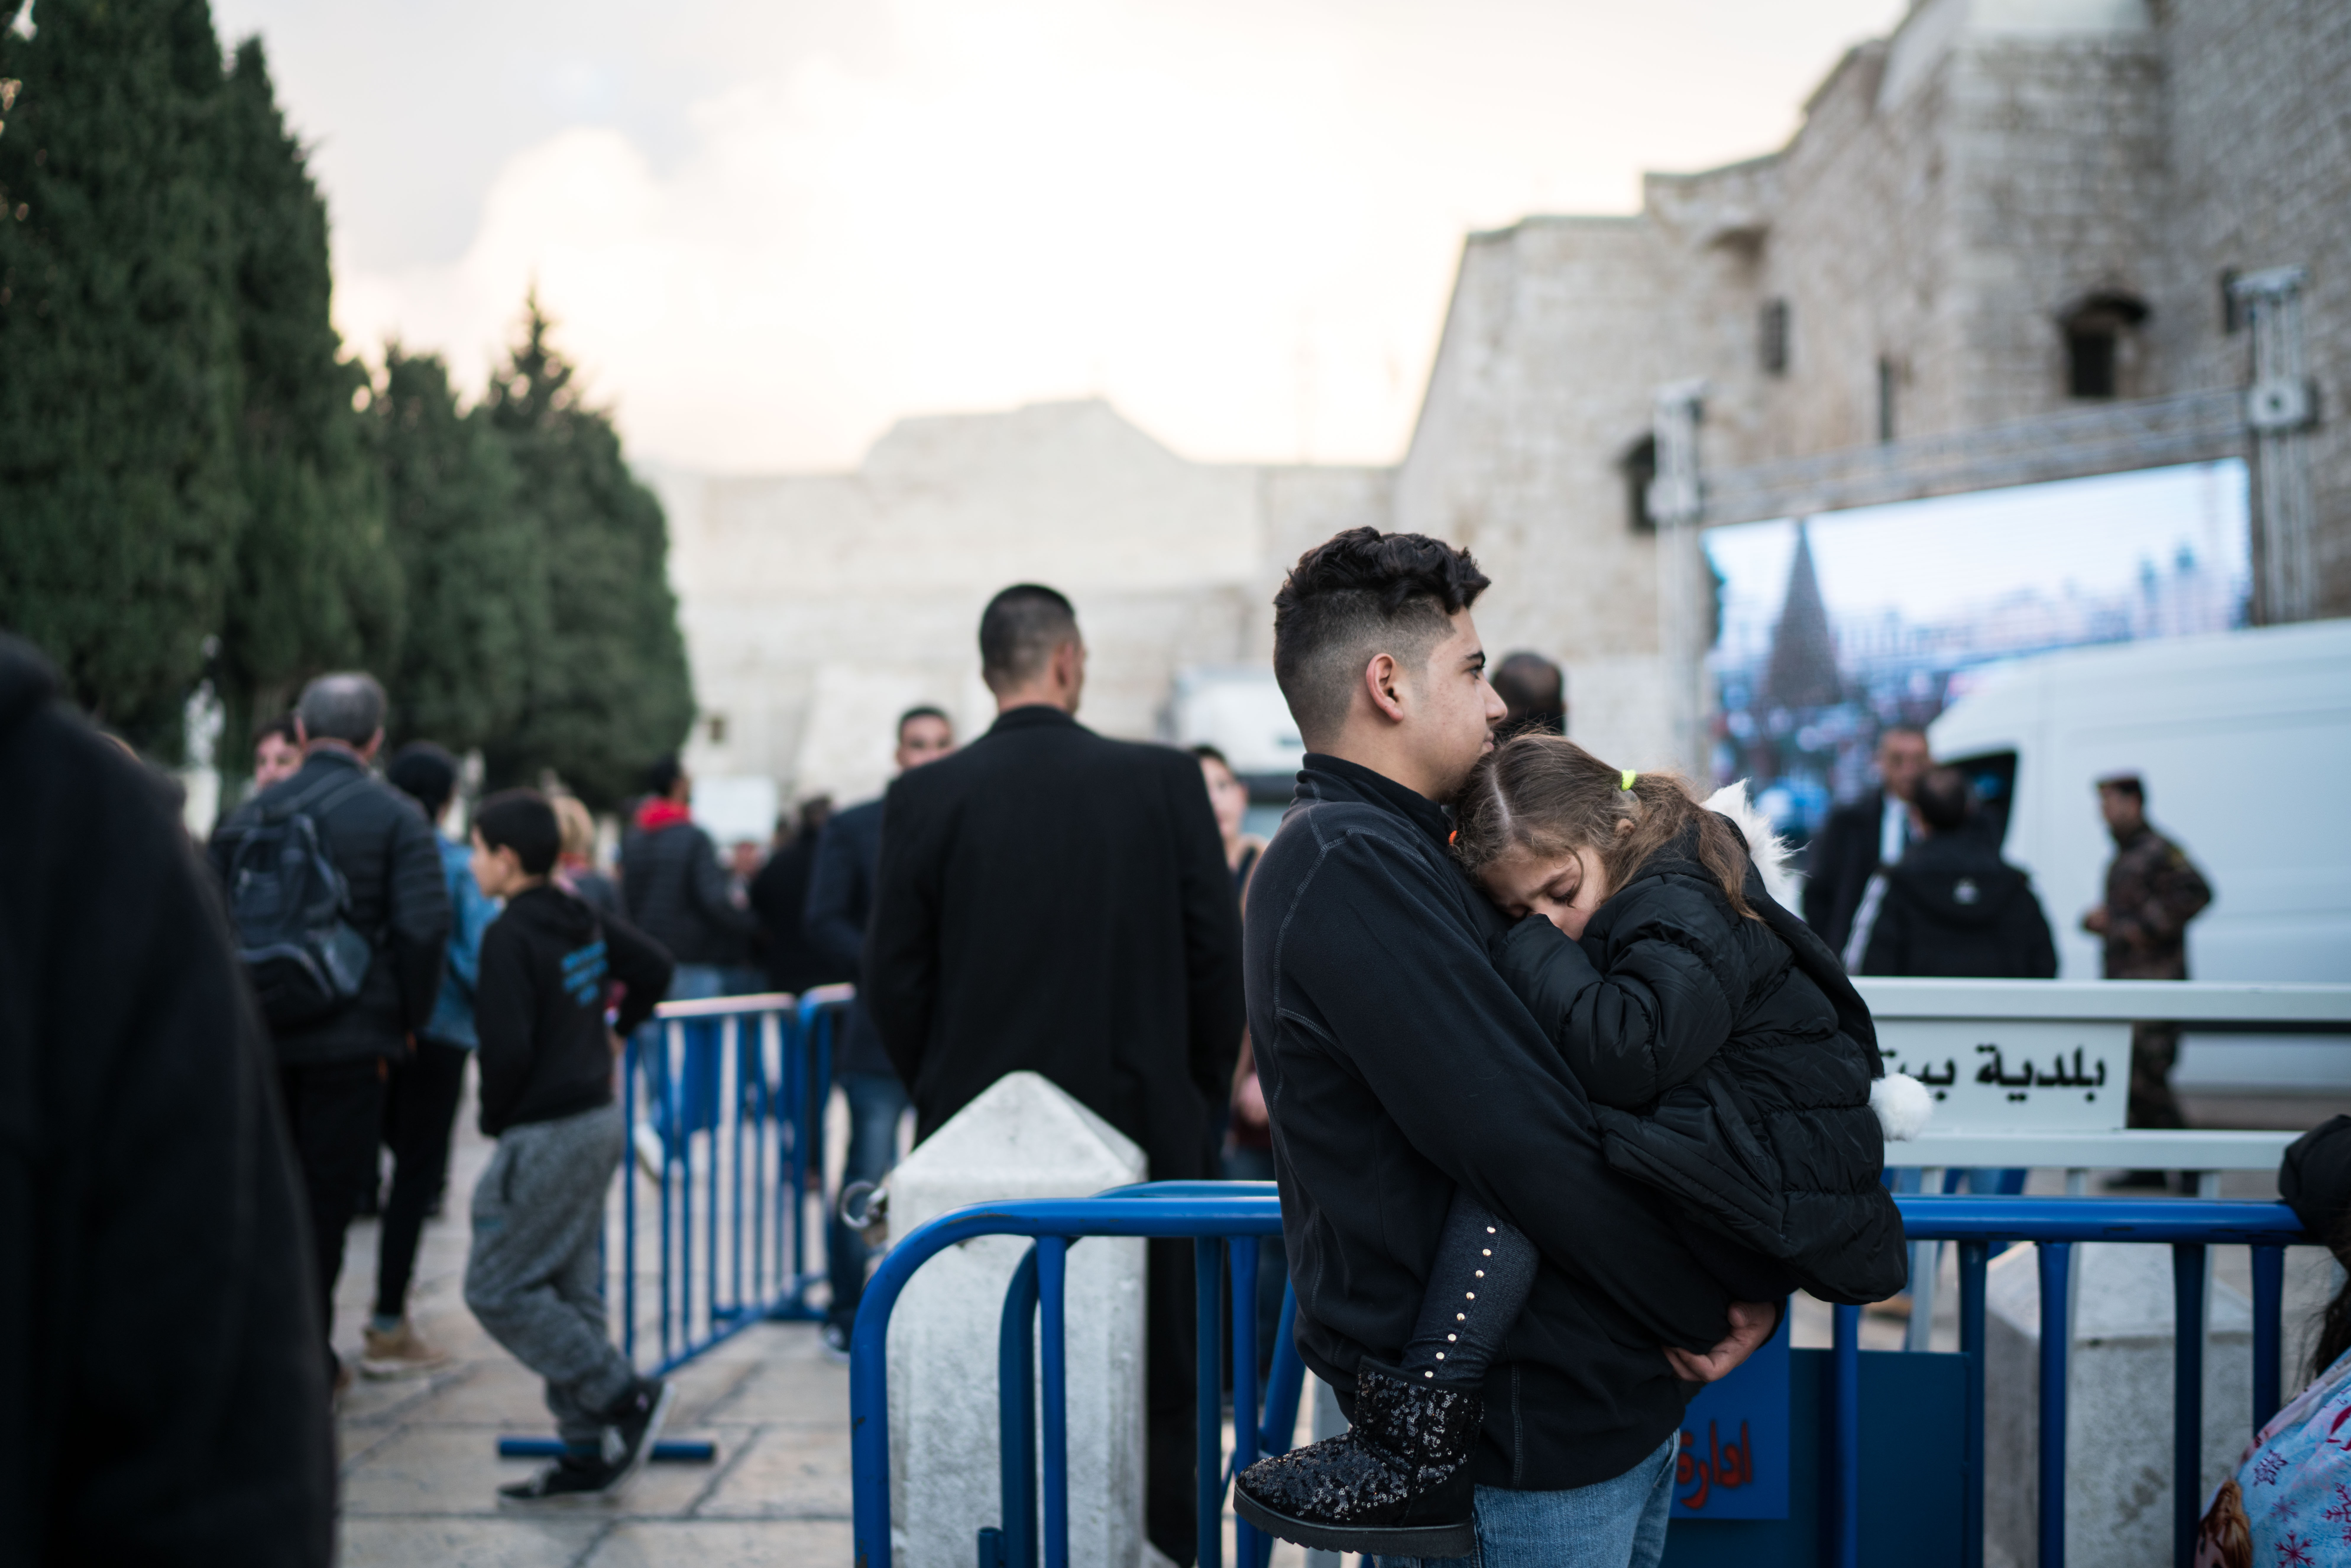 Salim carries his cousin, whom he hasn't seen for three years, outside the Church of the Nativity in Bethlehem on December 24, 2018.